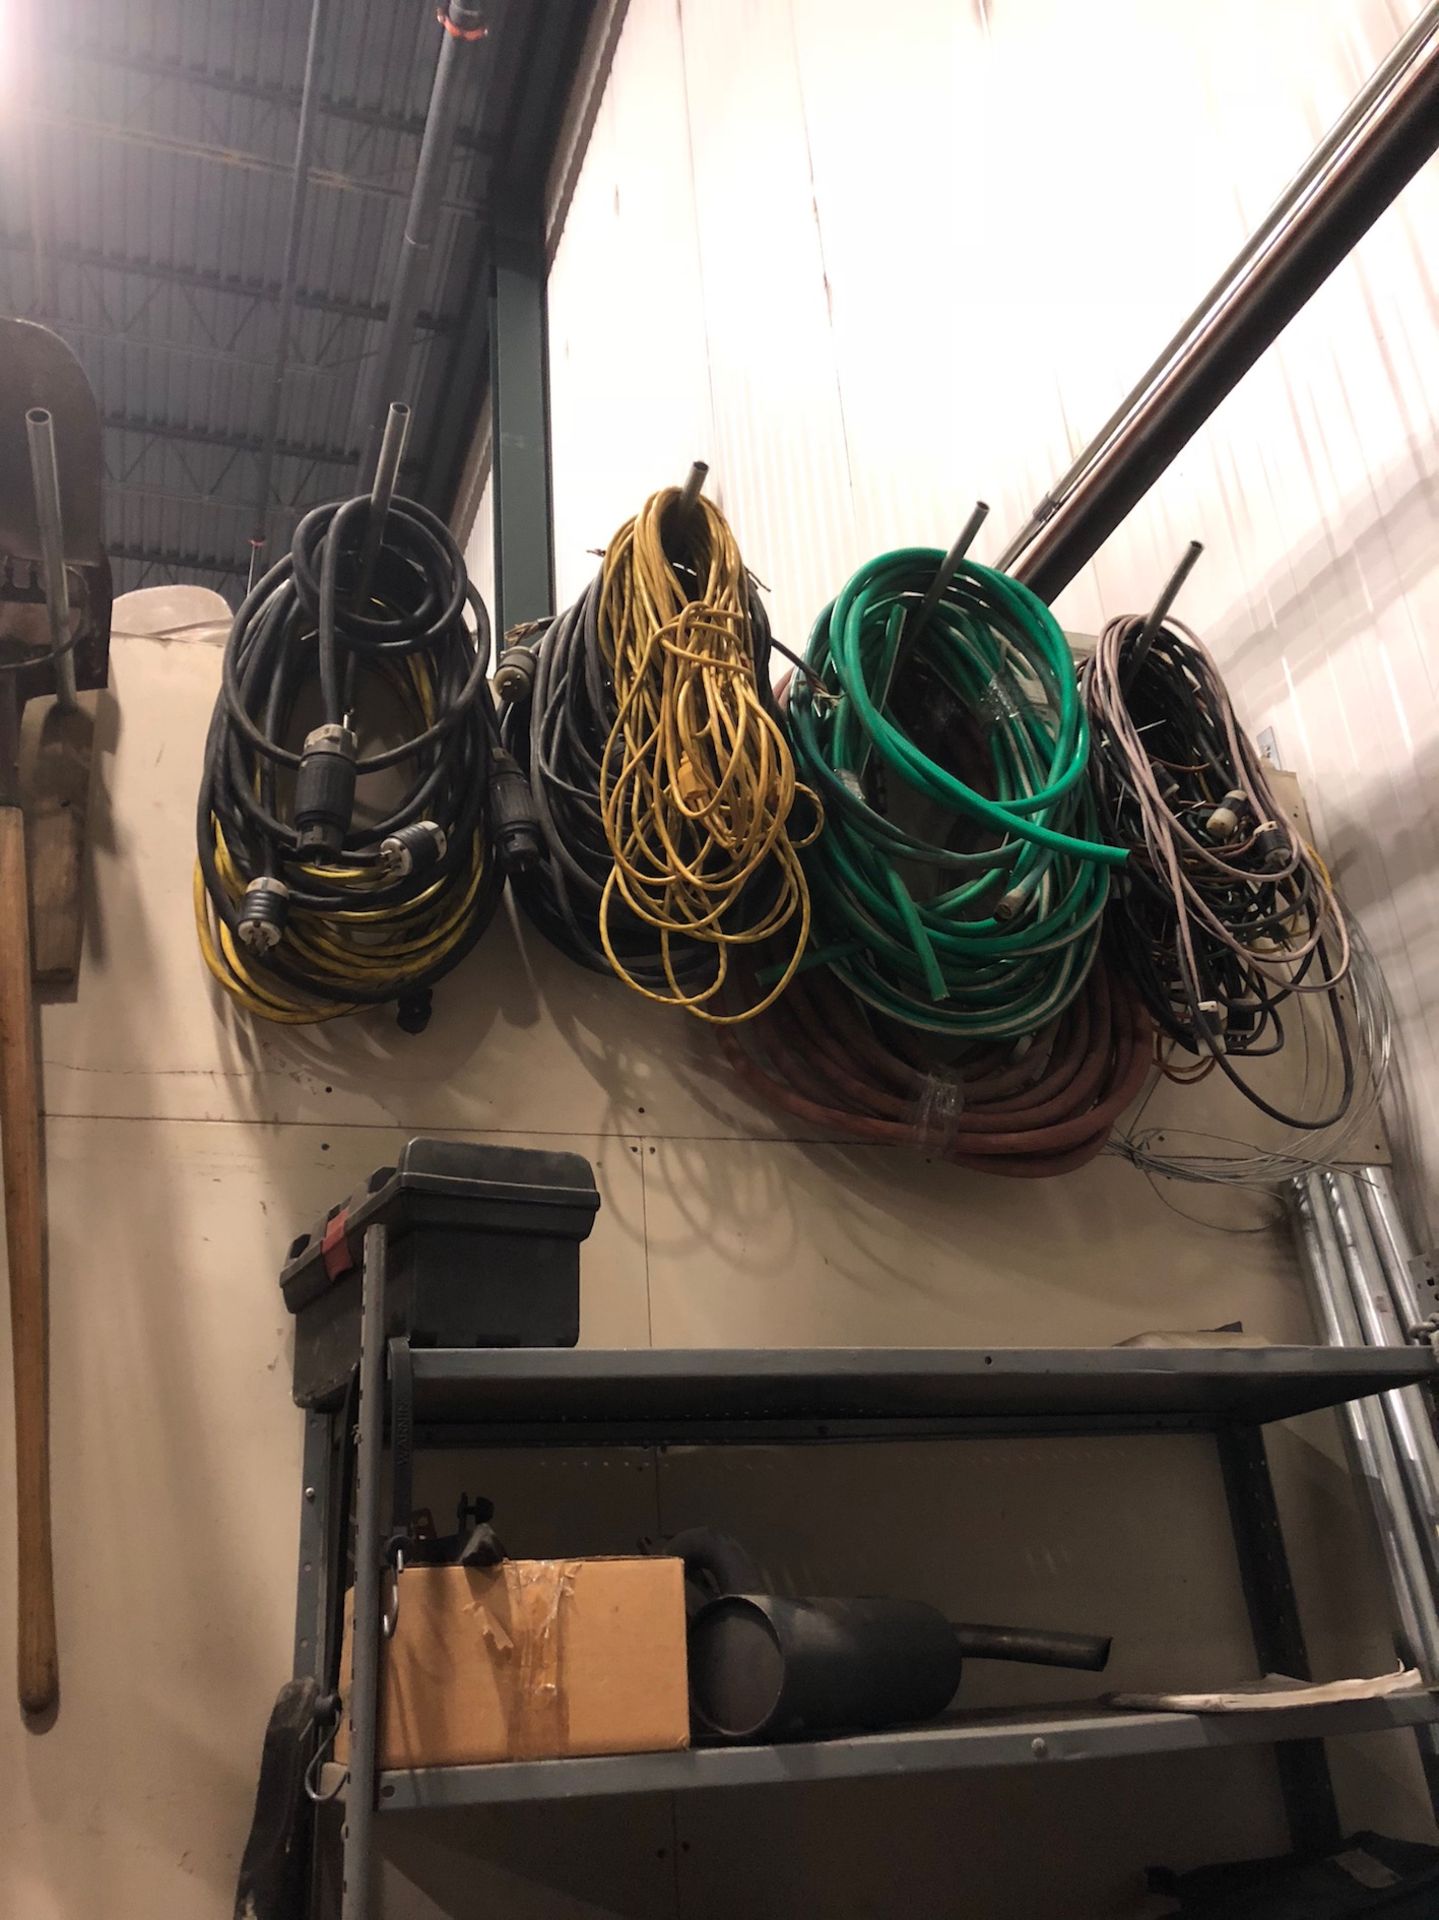 Assorted Extension Cords and Hoses